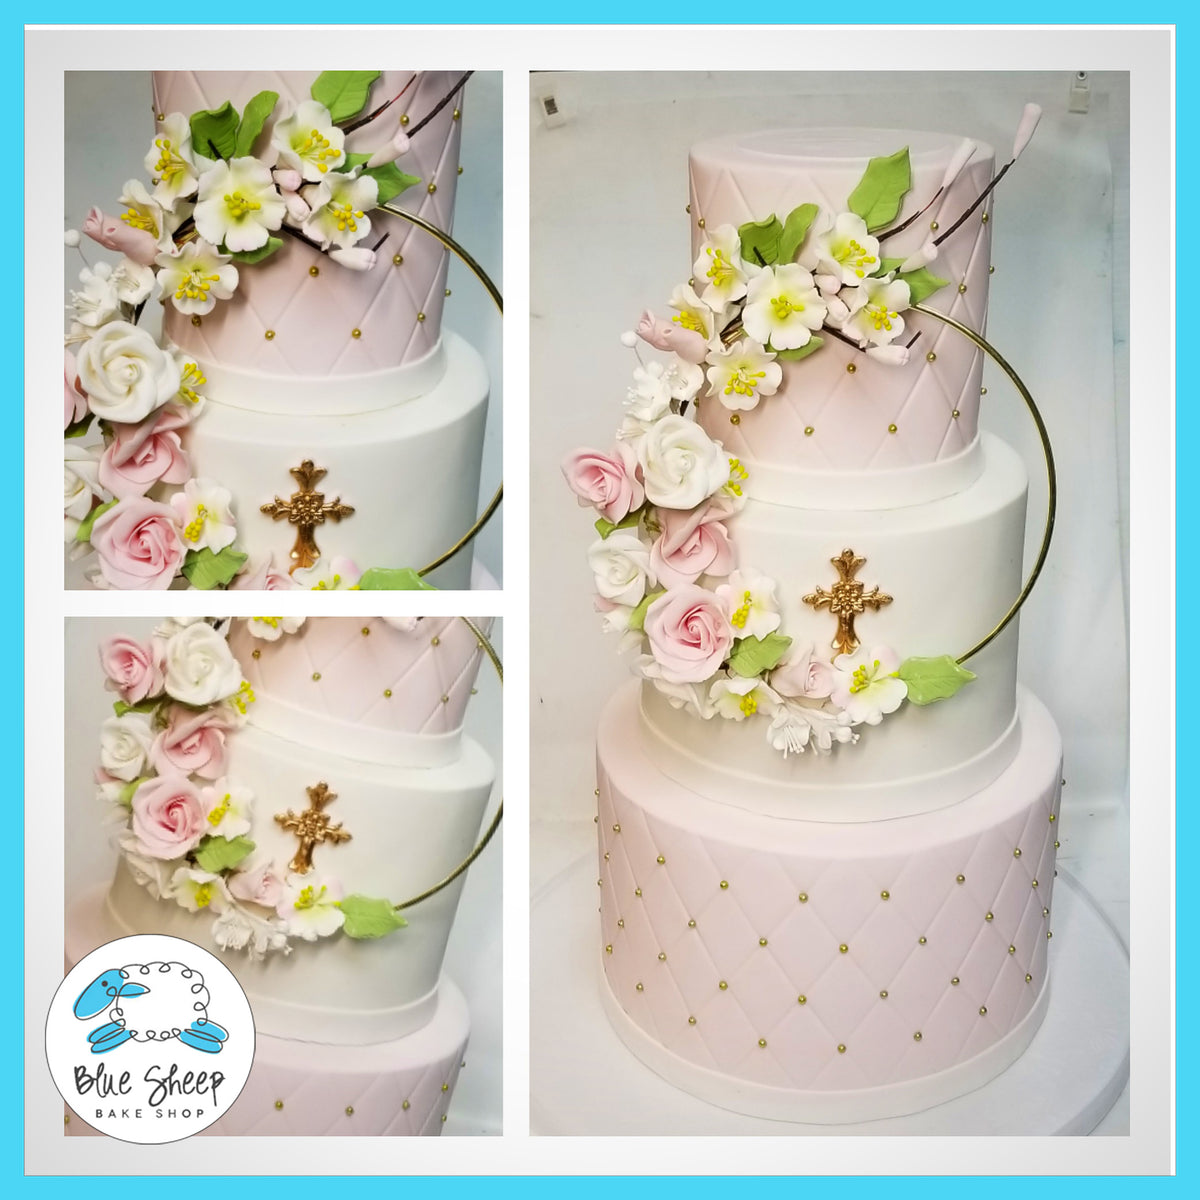 Blush And Gold Christening Cake With Sugar Floral Wreath Blue Sheep Bake Shop